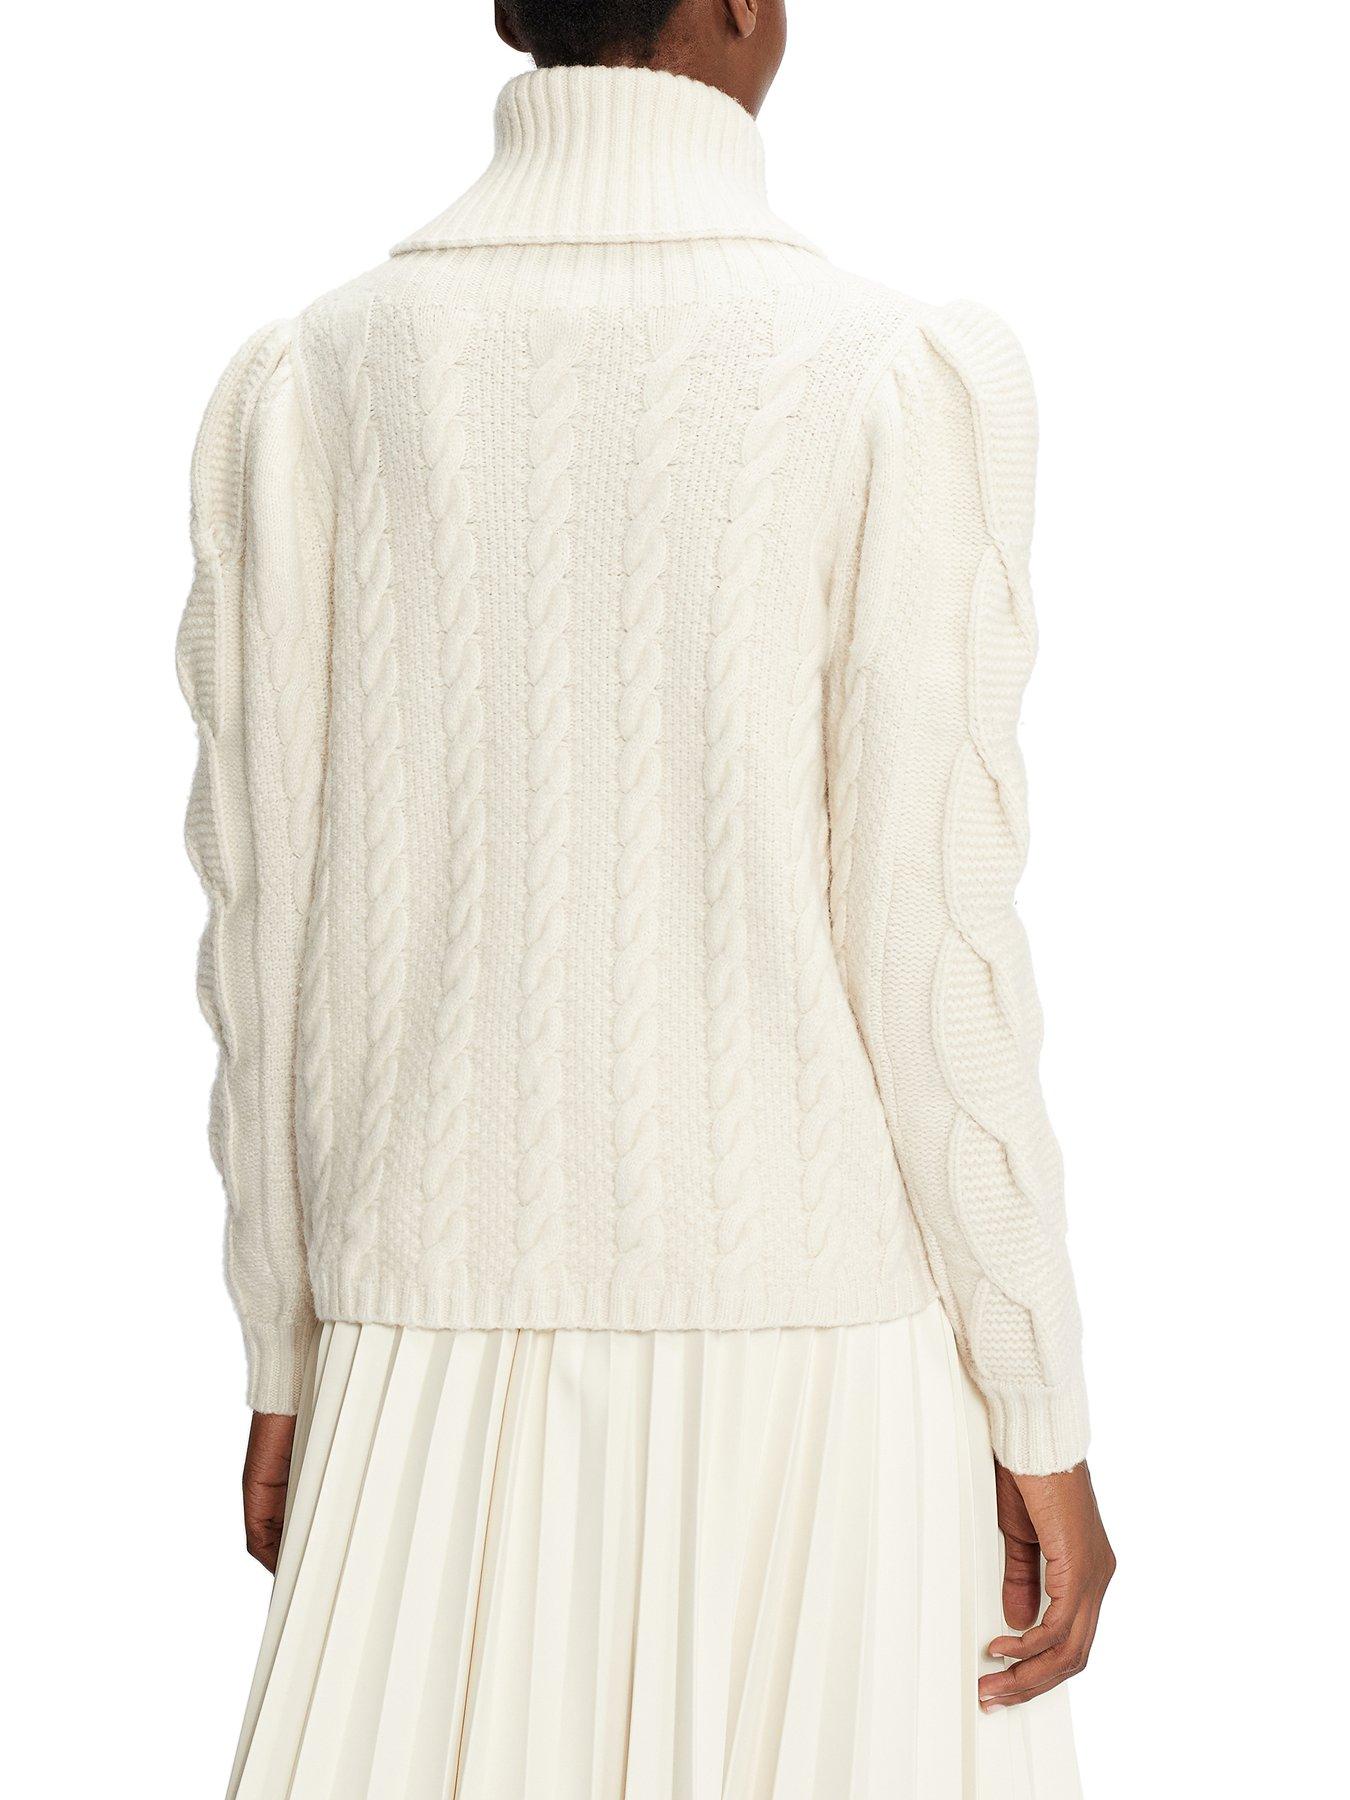  Ted Baker Vvera Extreme Sleeve Cable Sweater